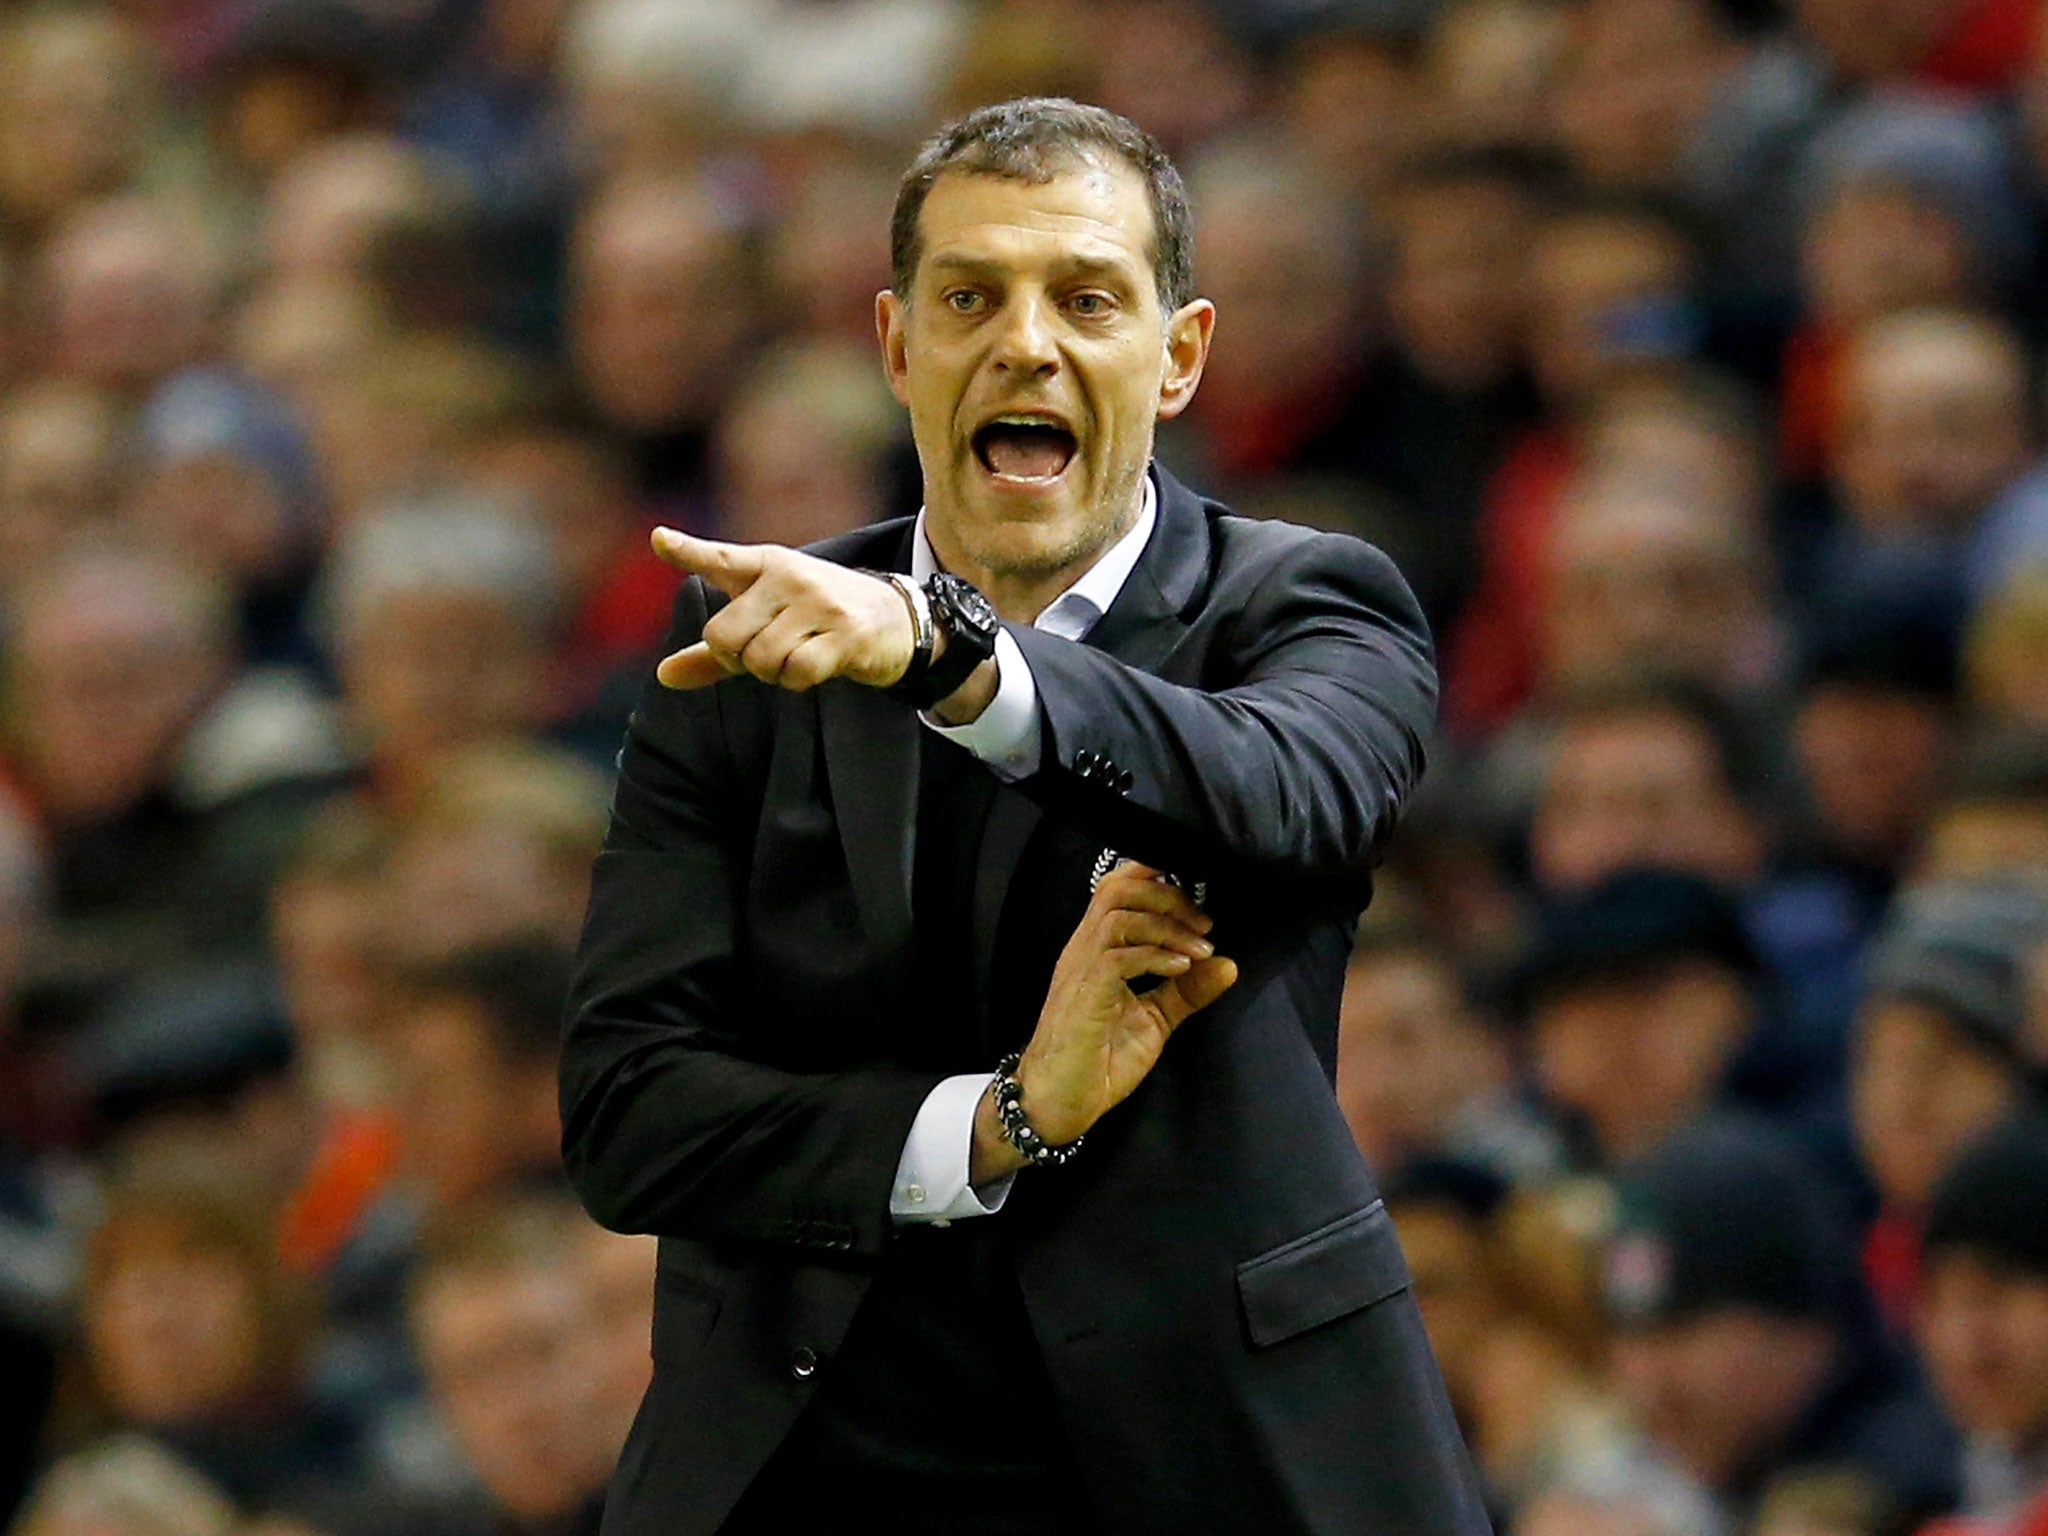 Slaven Bilic has been manager of Besiktas for two years